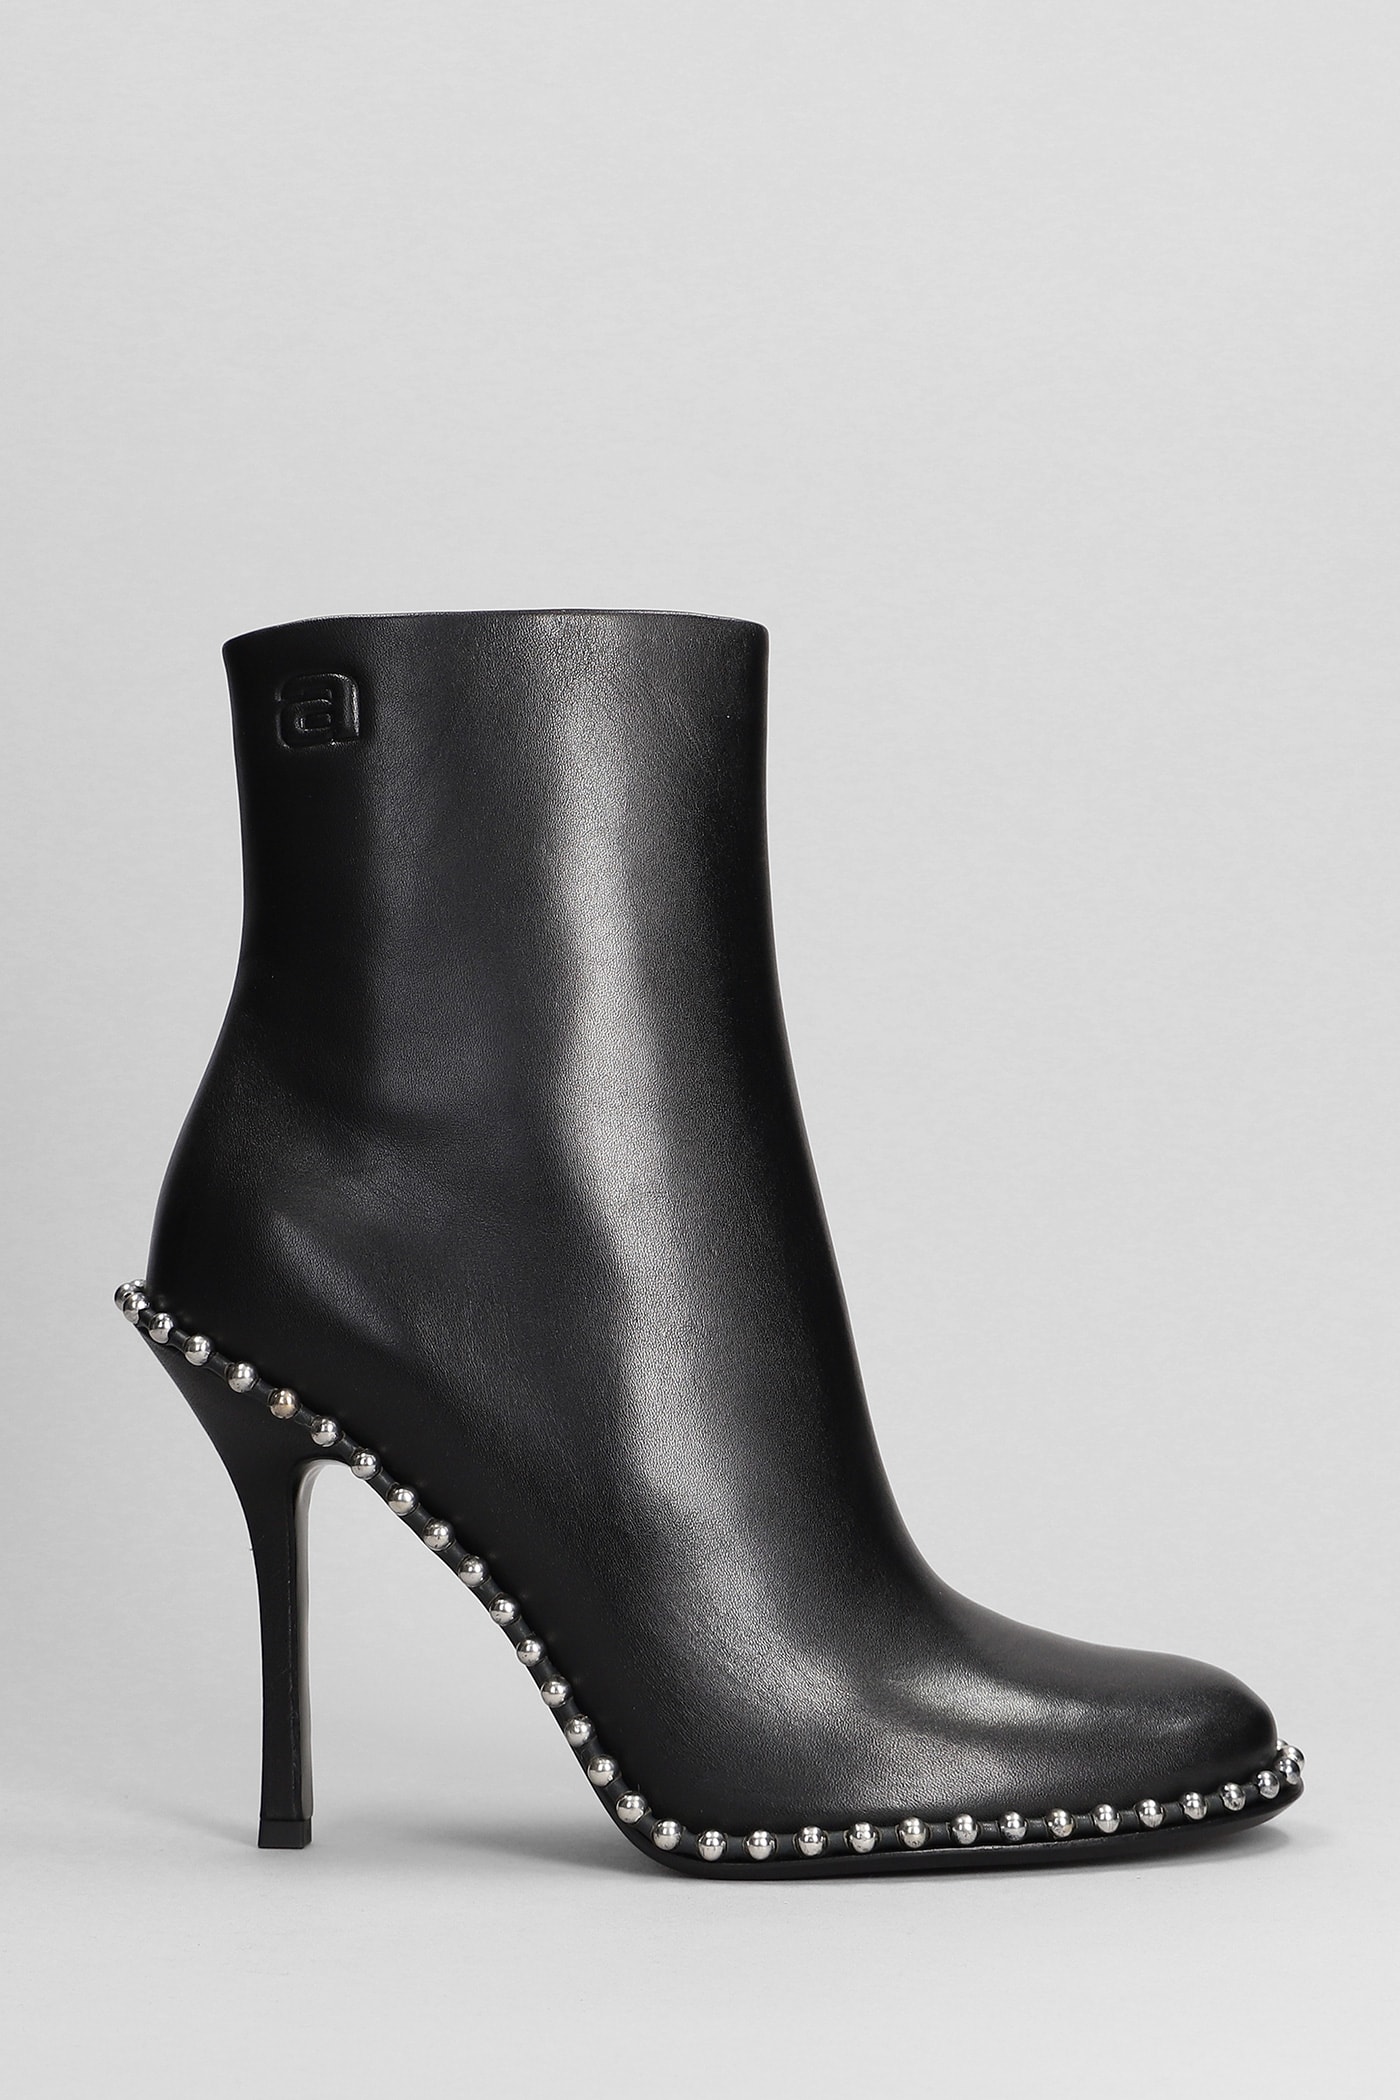 Nova 105 High Heels Ankle Boots In Black Leather